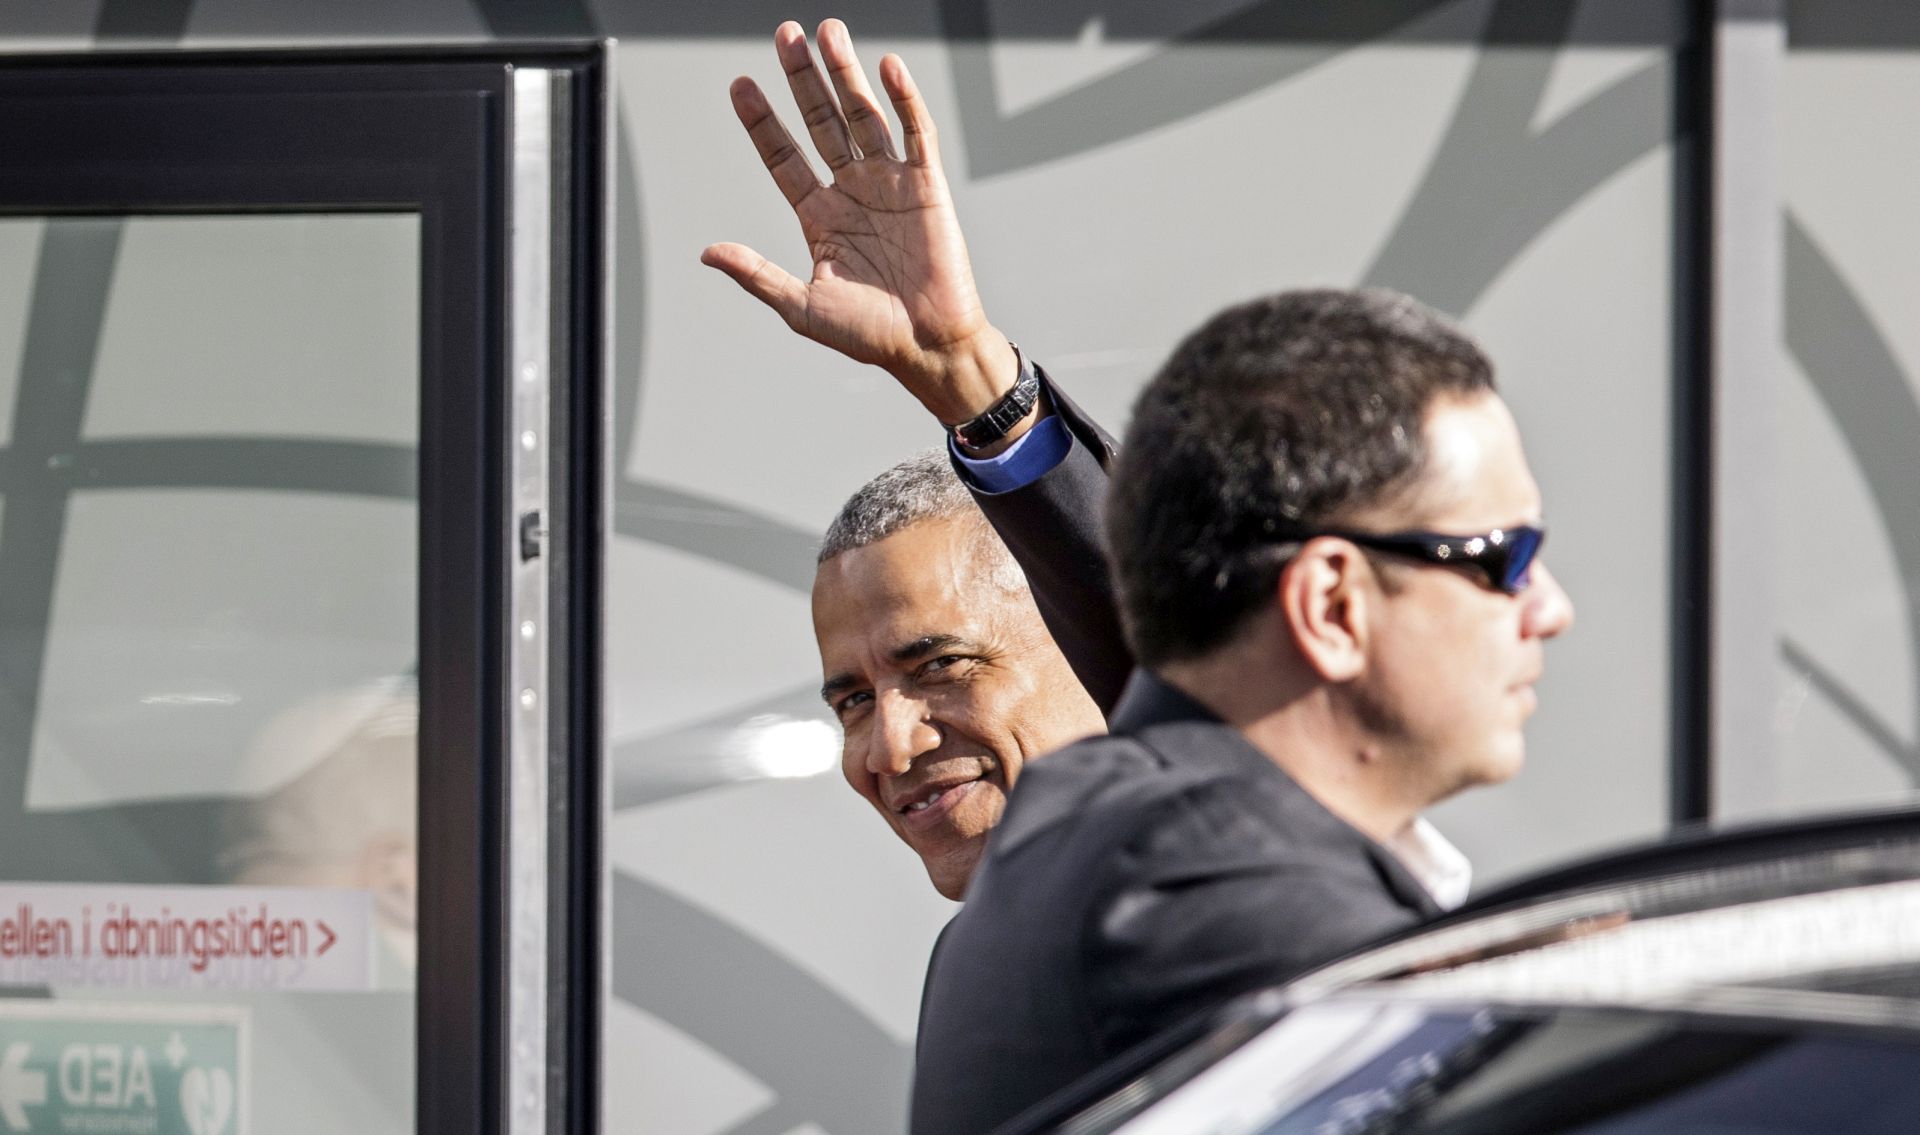 epa07053577 Former US president Barack Obama waves as he arrives to participate in 'A Conversation with President Barack Obama' at University of Southern Denmark (SDU) campus in Kolding, Denmark 28 September 2018. The former president Obama will participate in a question and answers (Q&A) at the SDU with business leaders, students and other people.  EPA/Mikkel Berg Pedersen  DENMARK OUT